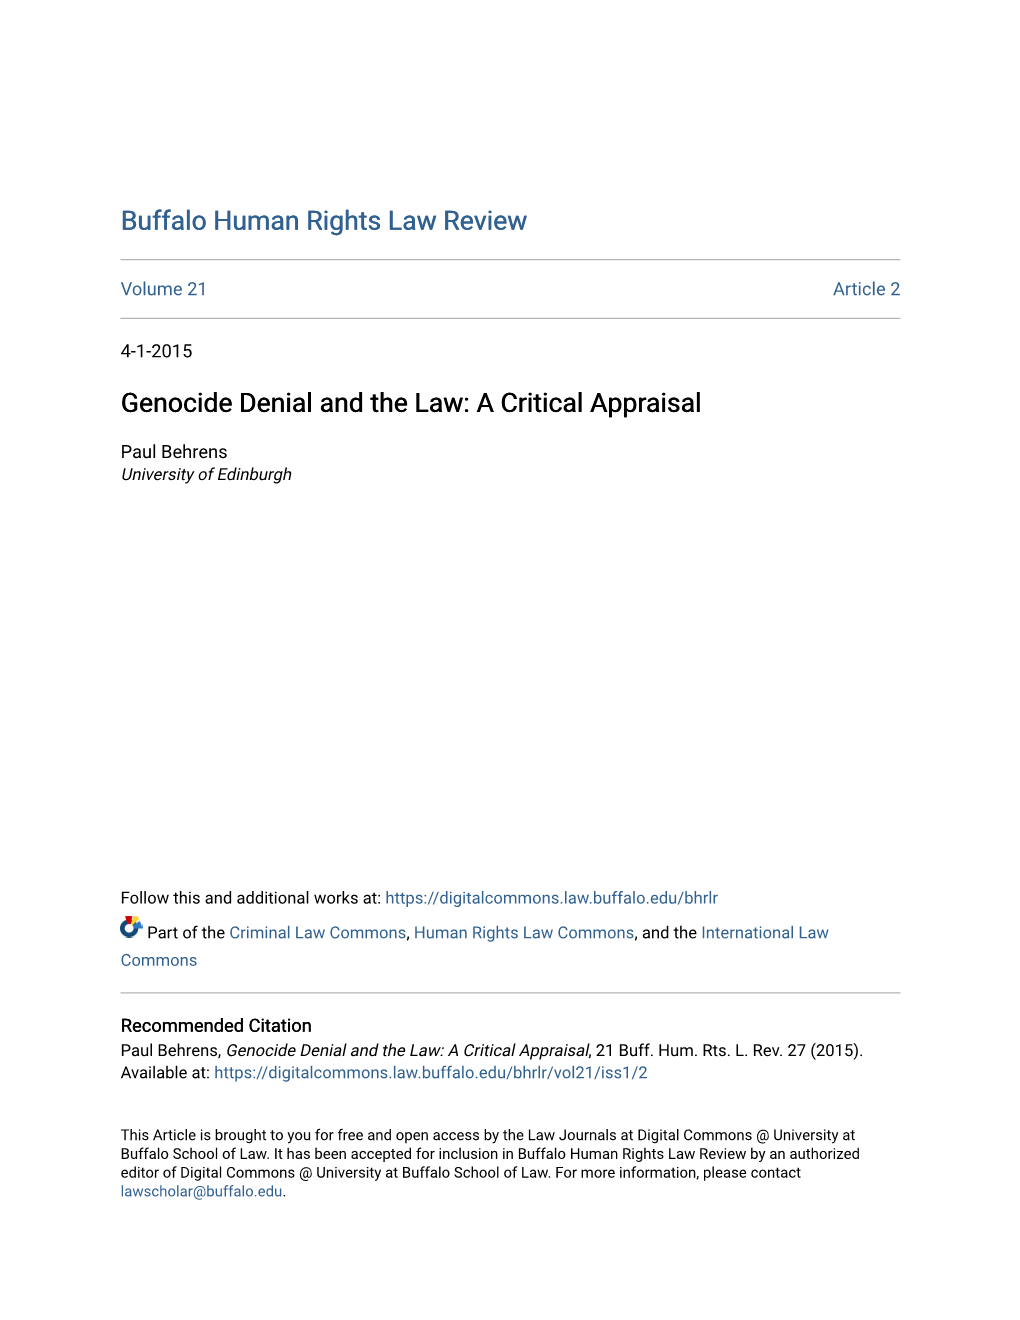 Genocide Denial and the Law: a Critical Appraisal